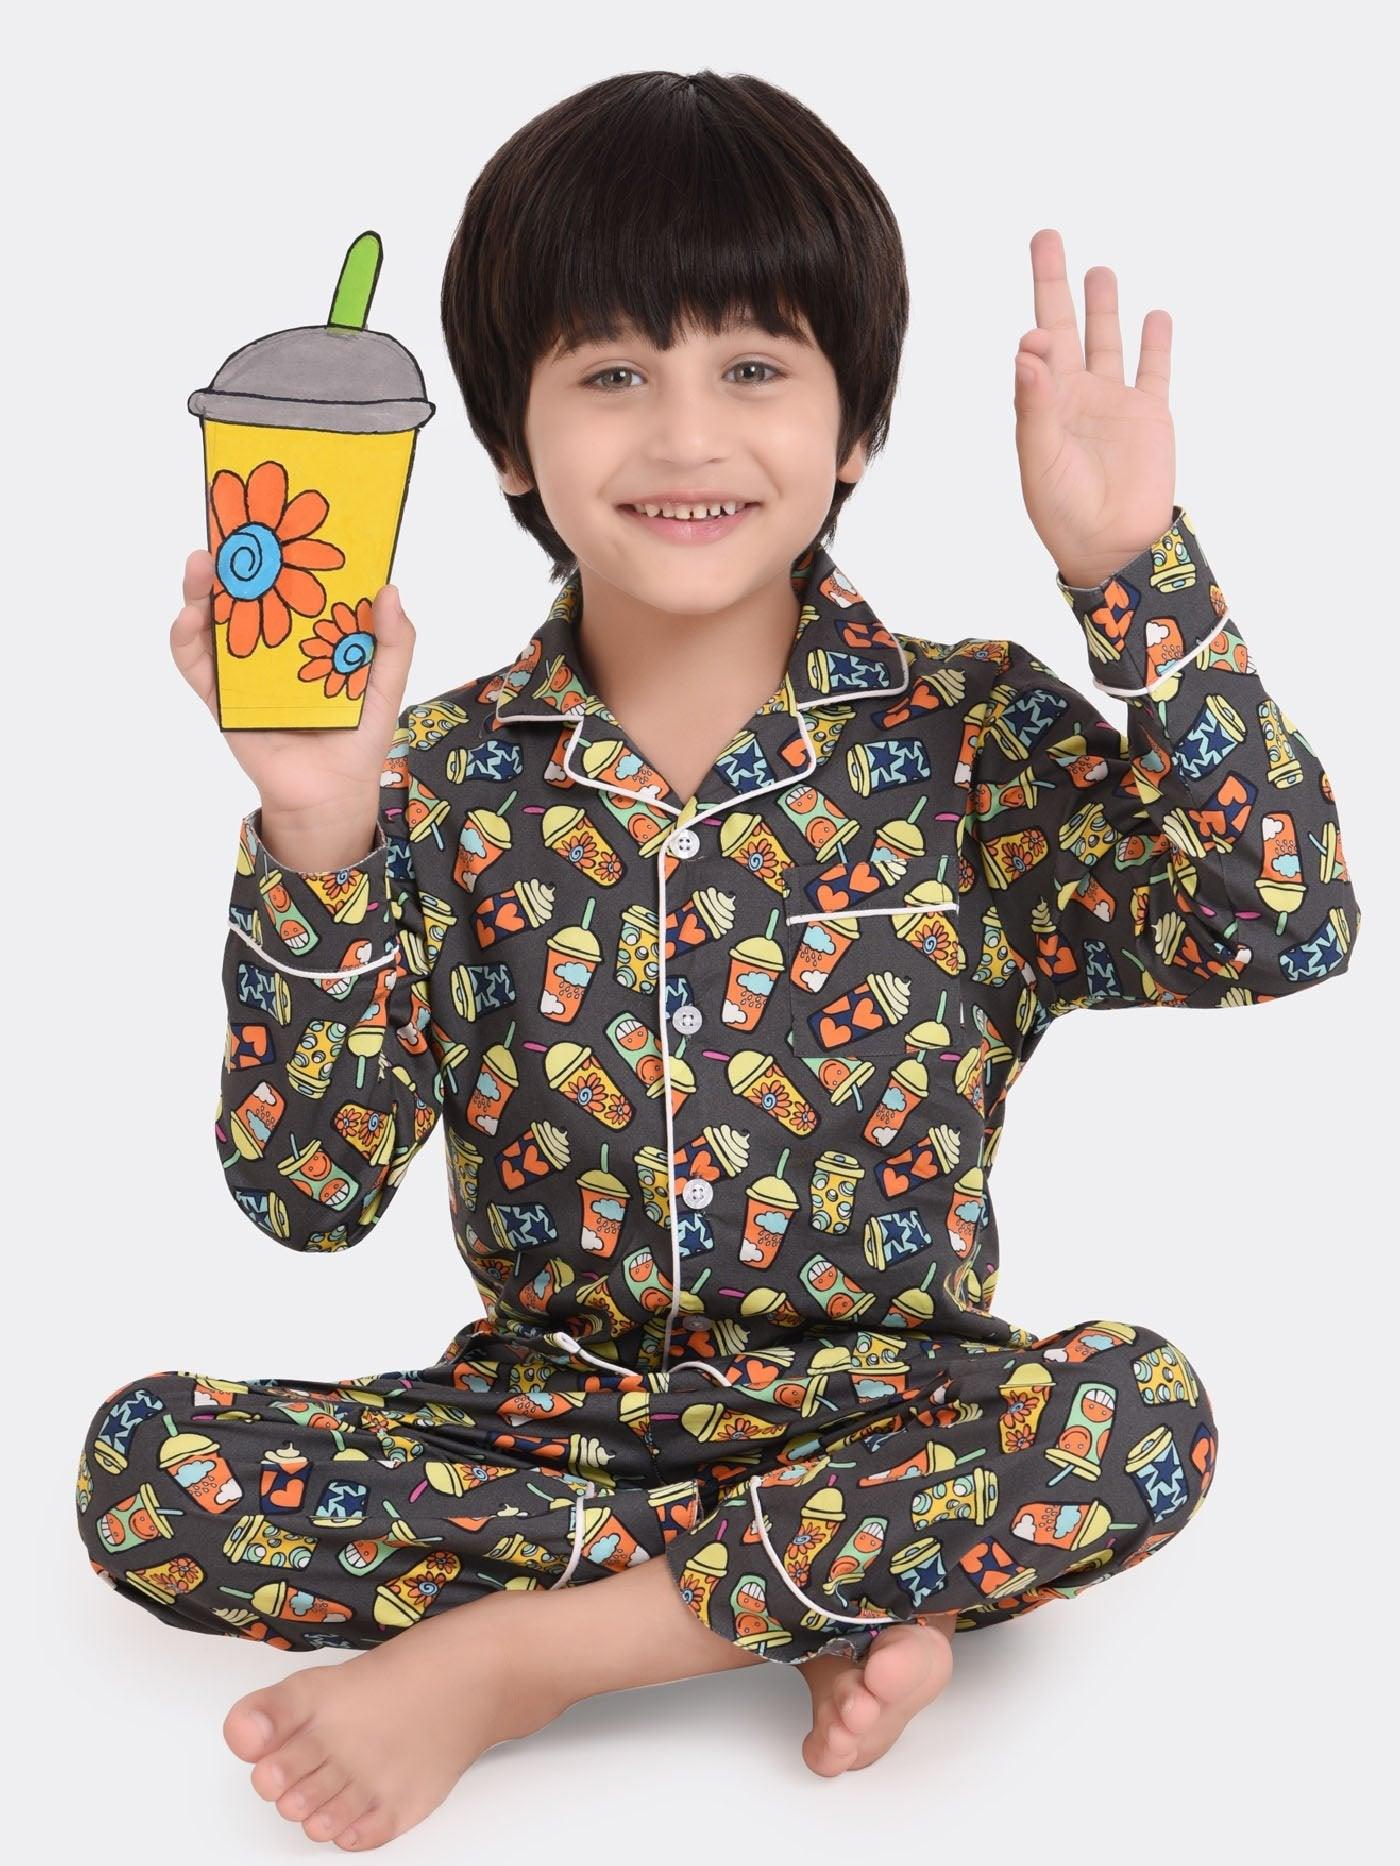 Colour Sipper Printed Nightsuit Set